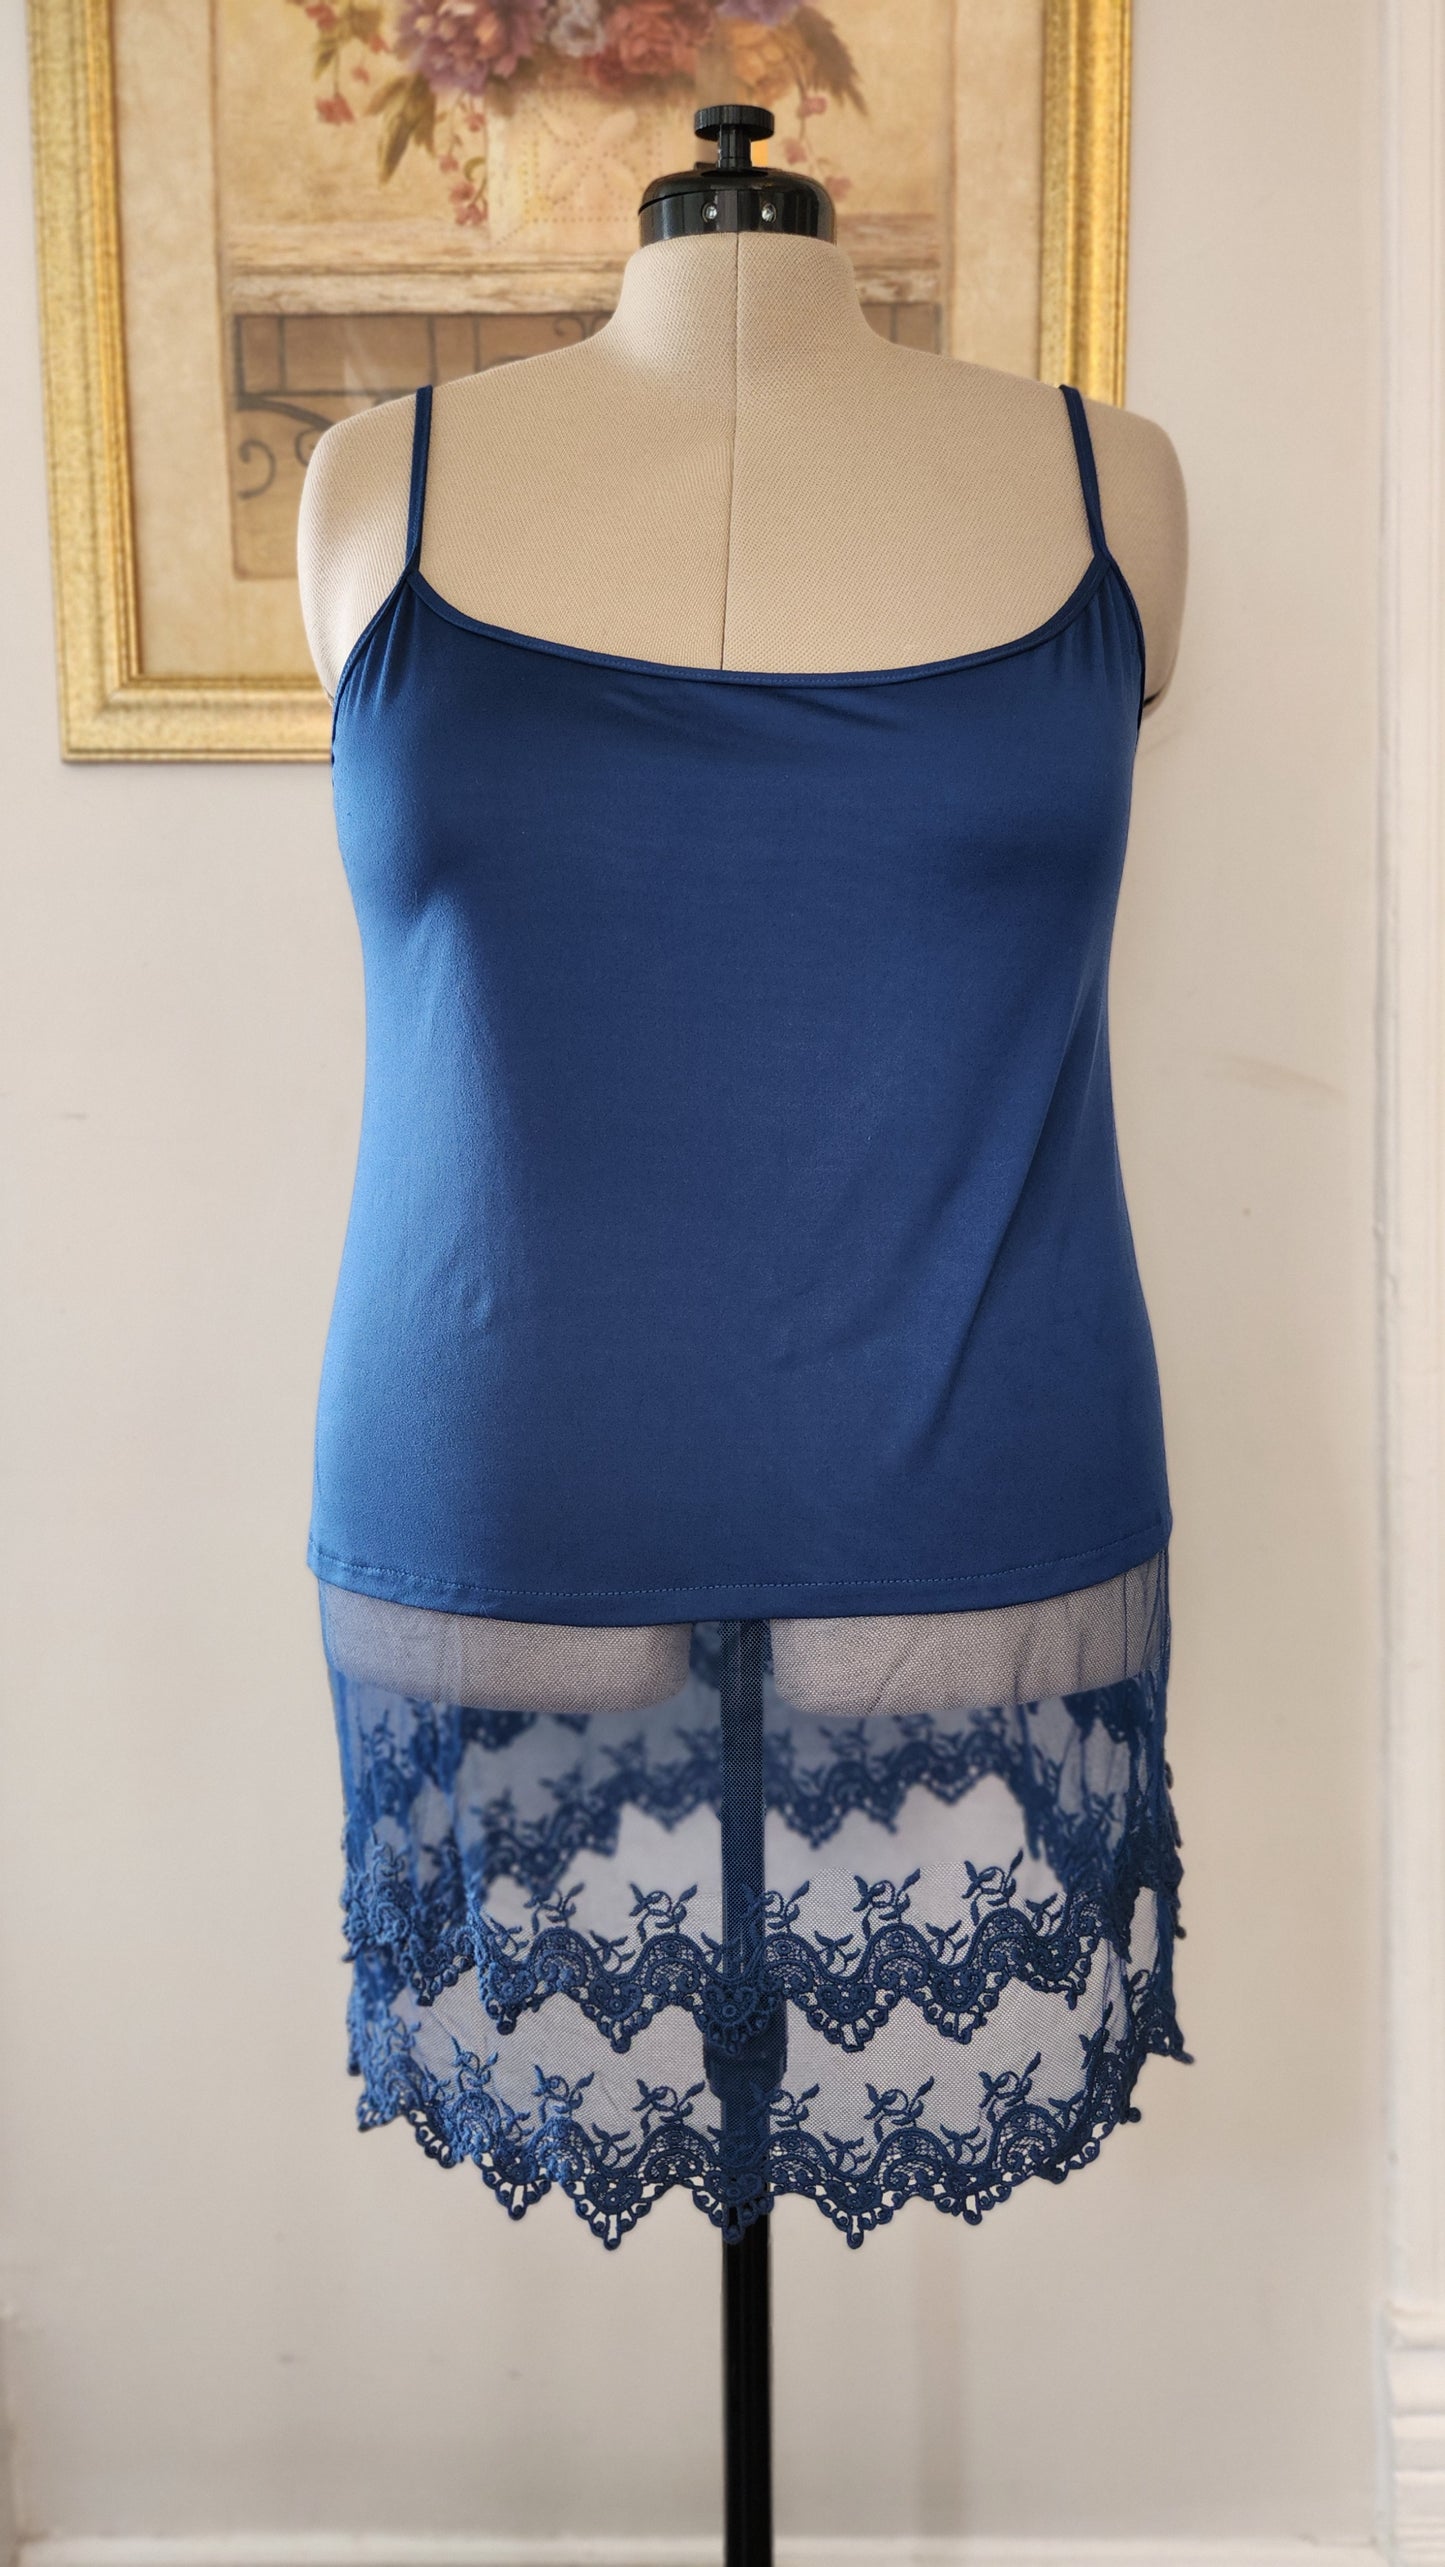 Size 3x Blue Tank Top with Lace Trim